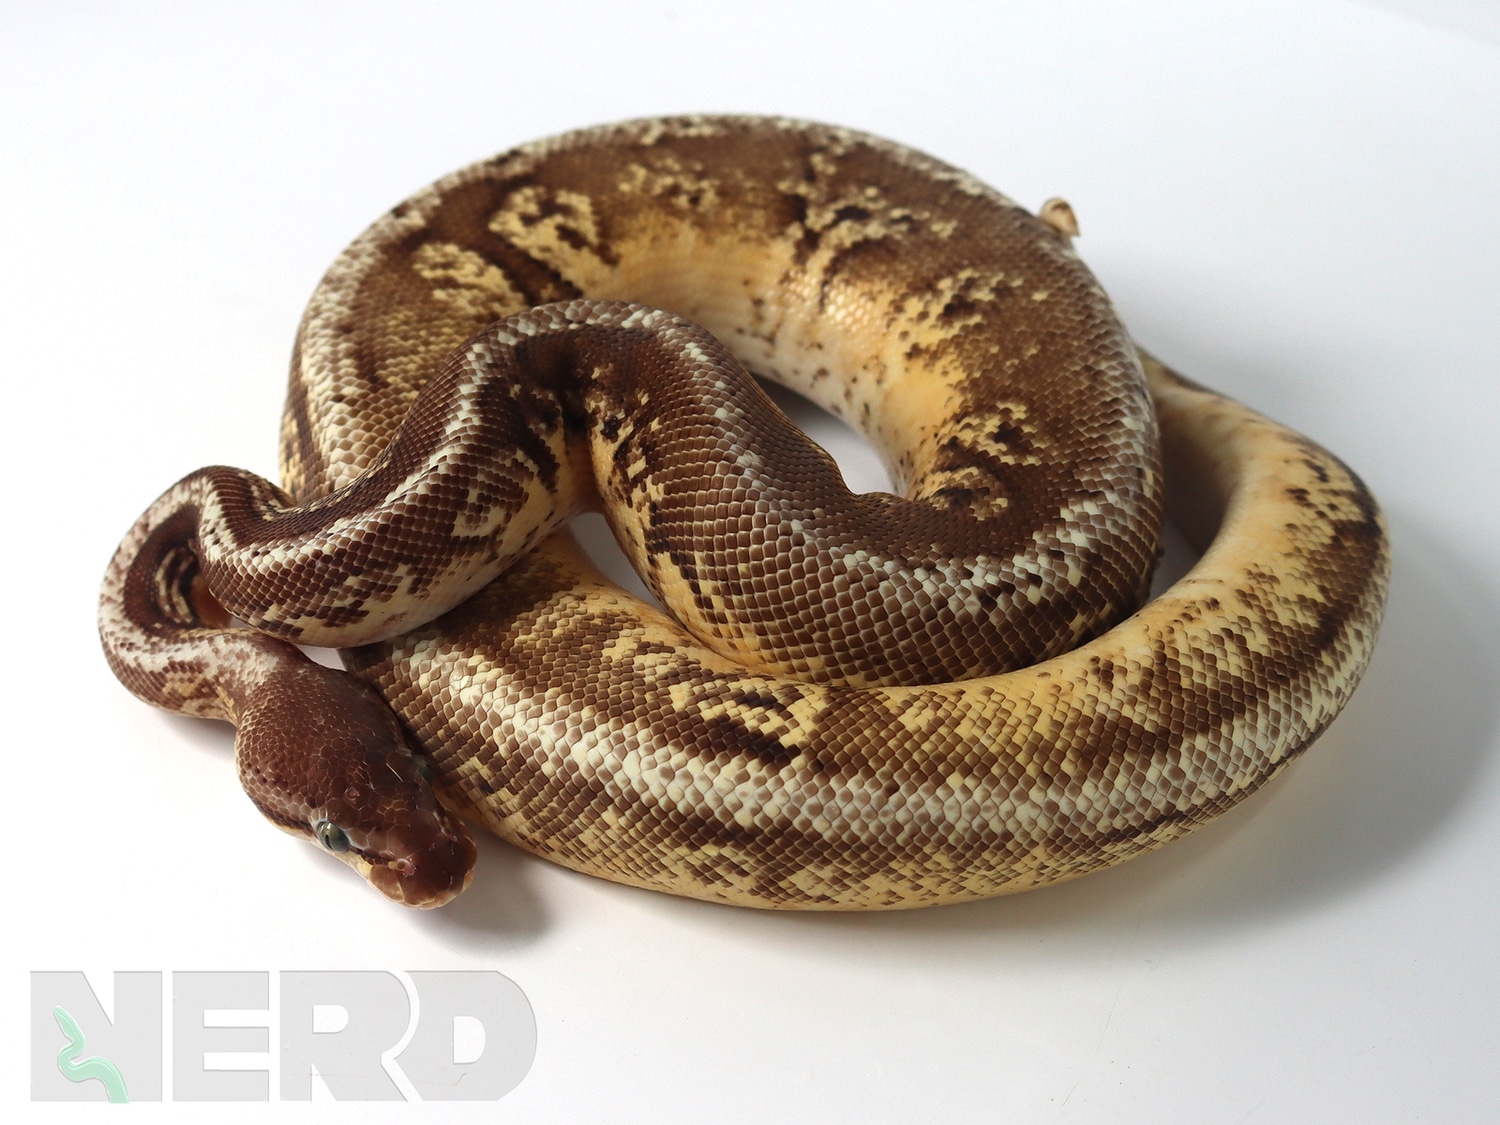 Pastel Hidden Gene Woma Granite Yellowbelly Super Fader Ball Python by New England Reptile Distributors